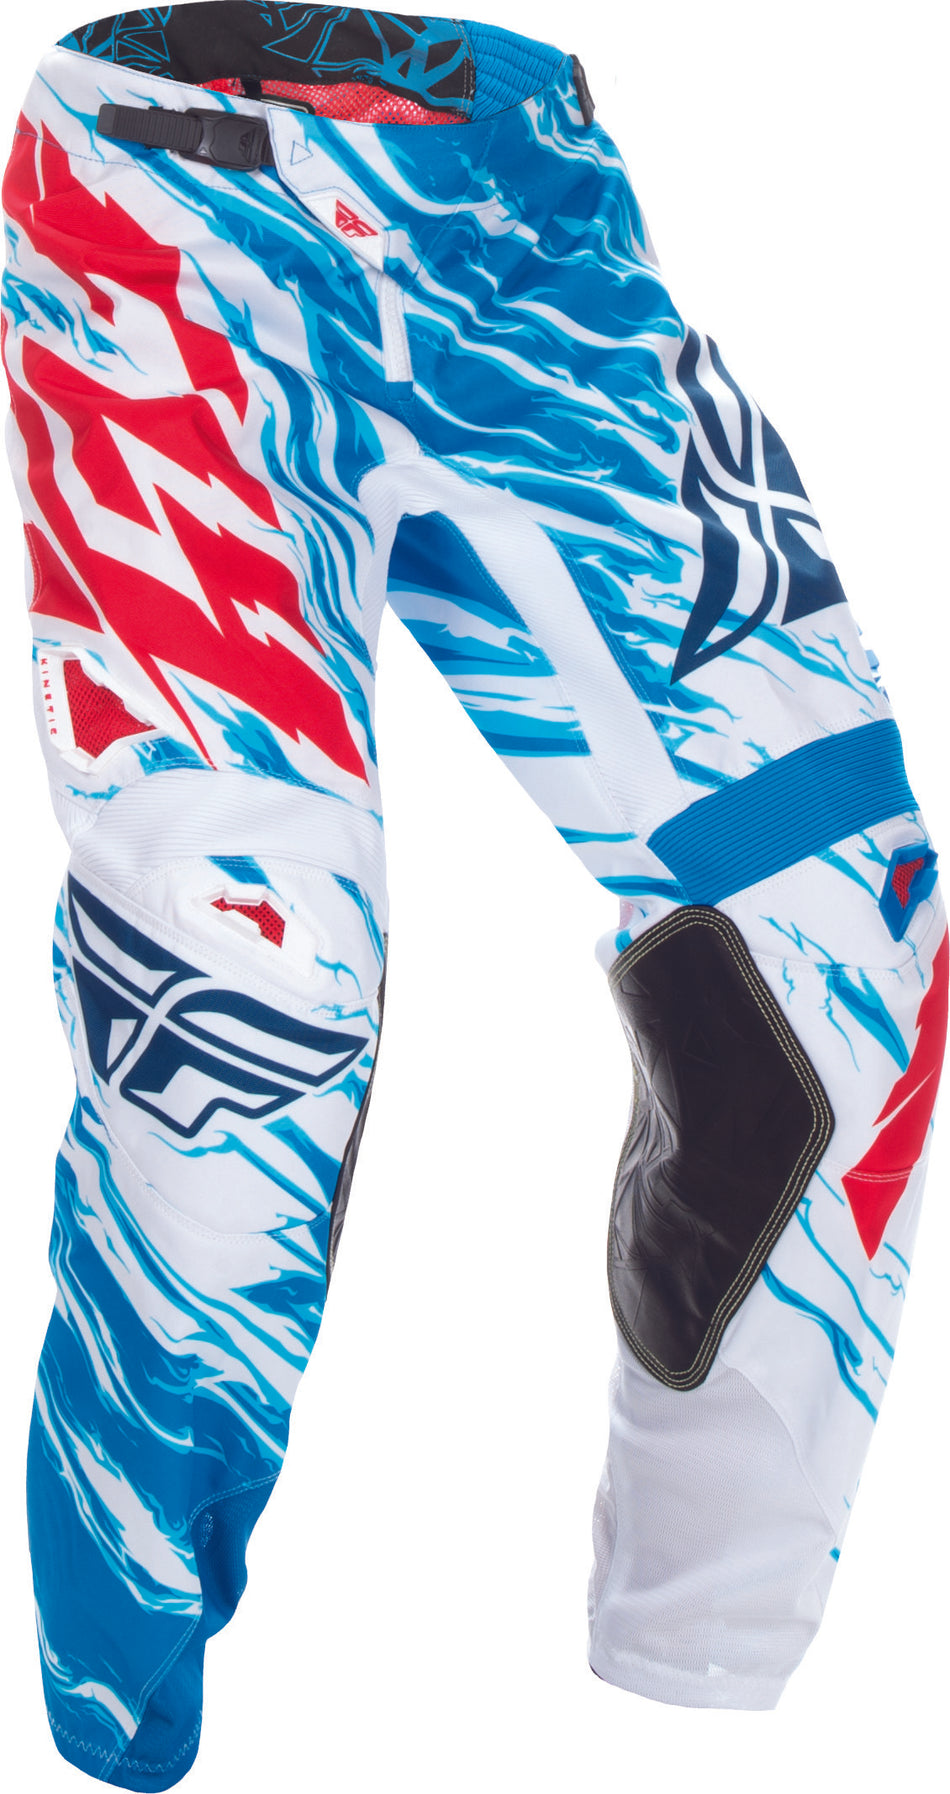 FLY RACING Kinetic Relapse Pant Red/White/Blue Sz 30 370-43230